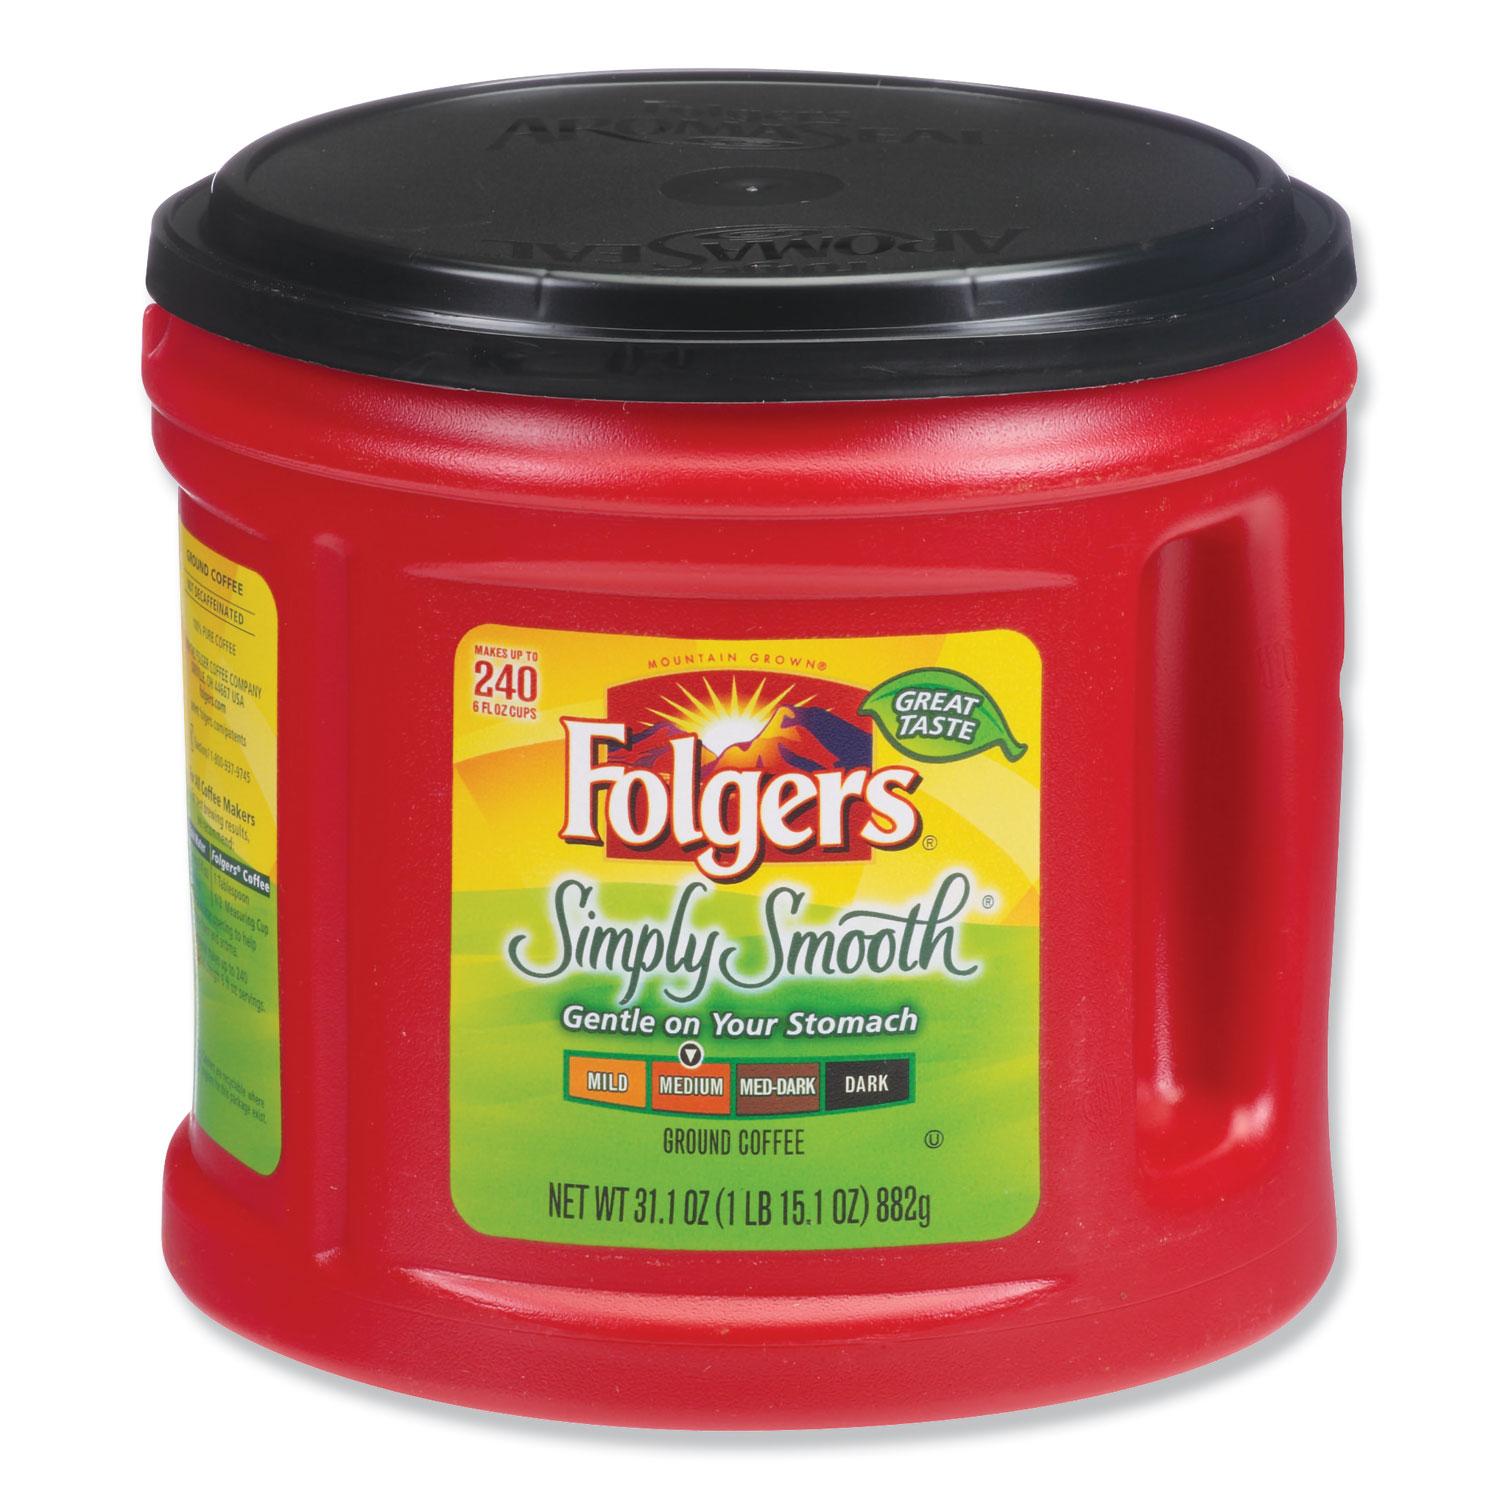  Folgers 2550020513 Coffee, Simply Smooth, 31.1 oz Canister (FOL20513) 